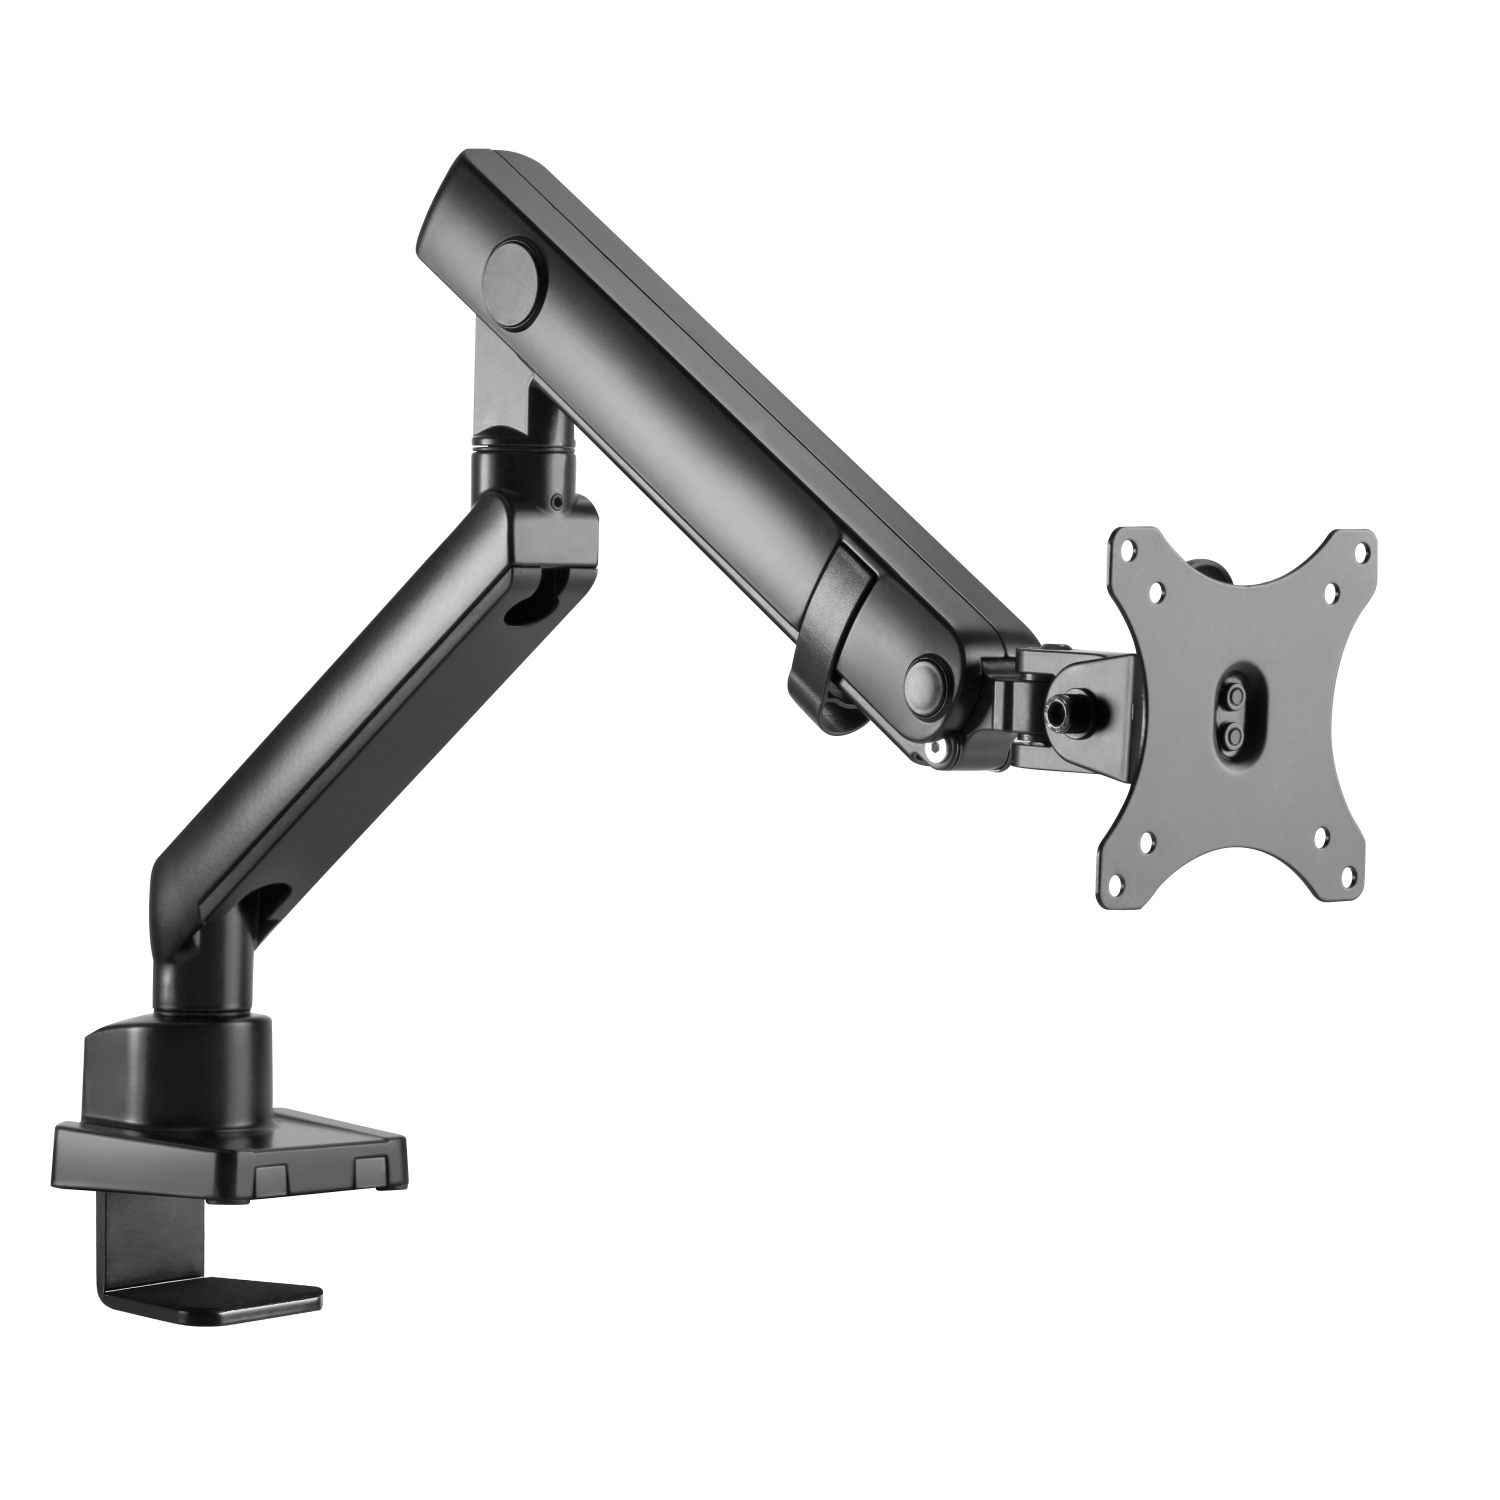 Amer Mounts Spring Assisted Single Articulating Arm For 15"-34" Monitors - Clamp and Grommet Base - HYDRA1B